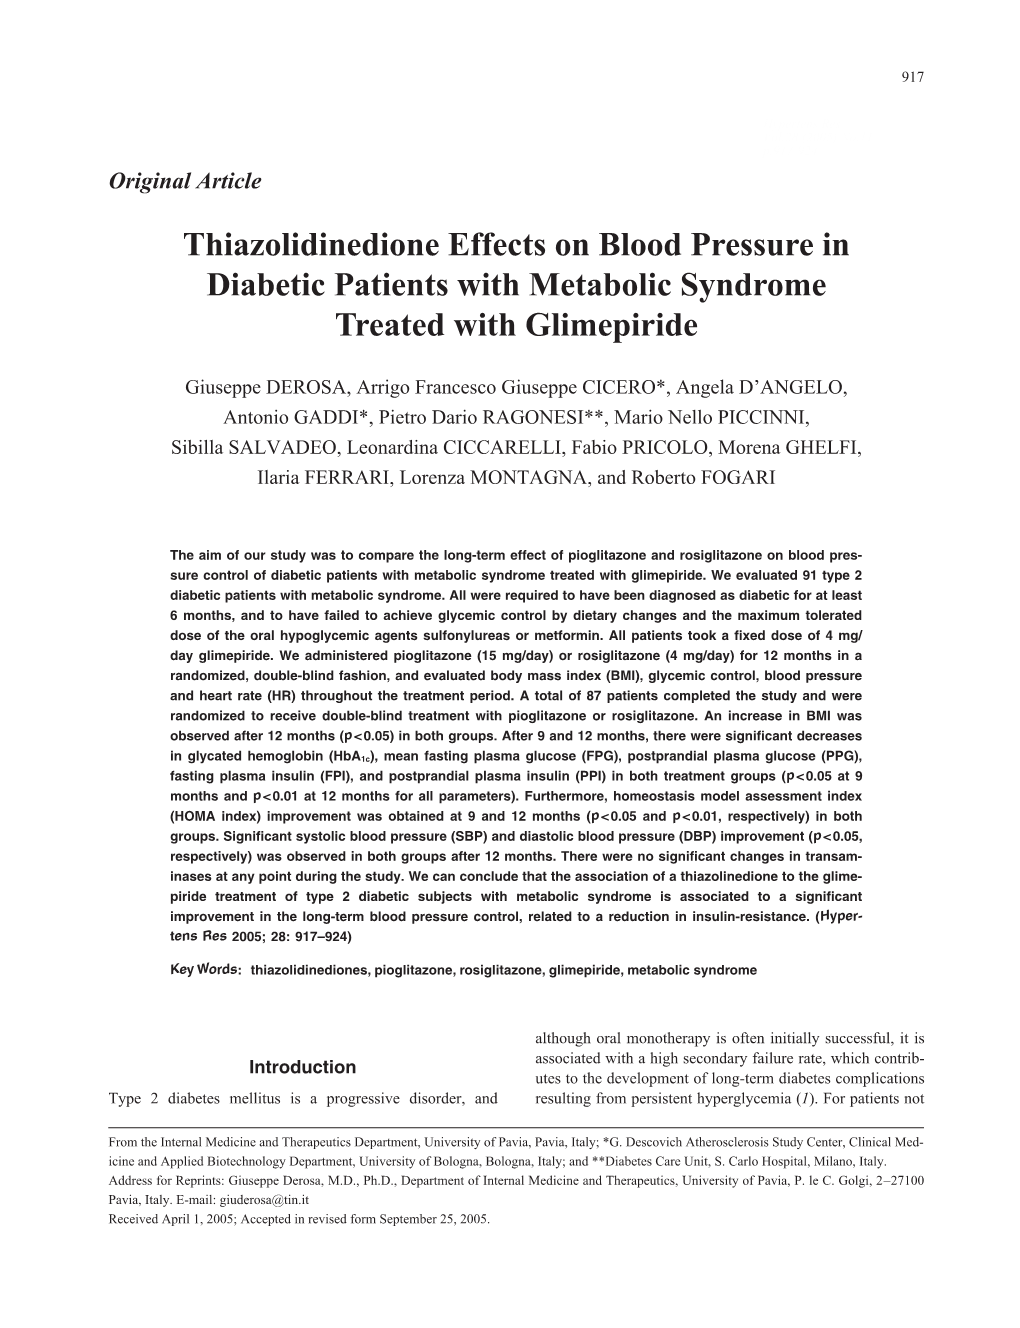 Thiazolidinedione Effects on Blood Pressure in Diabetic Patients with Metabolic Syndrome Treated with Glimepiride